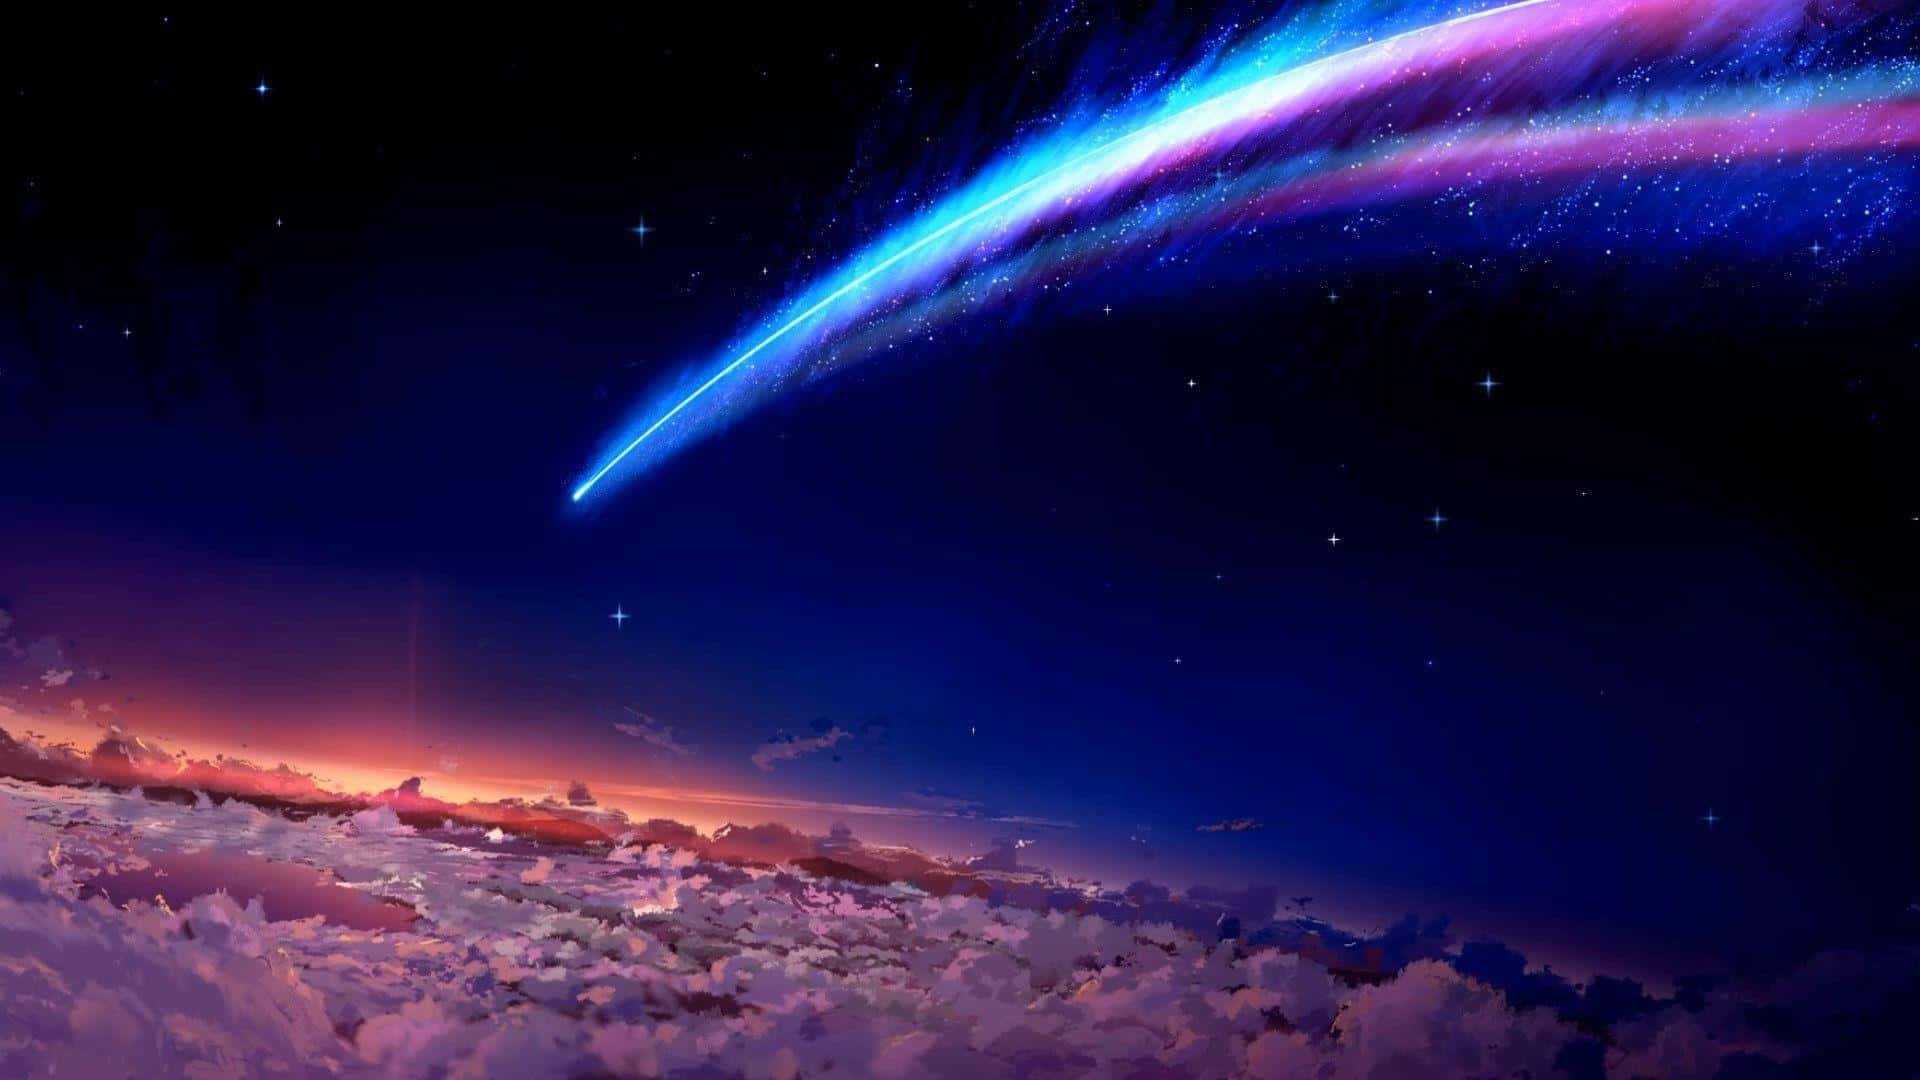 Enjoy the beauty of the Universe with 4K Anime Space Wallpaper